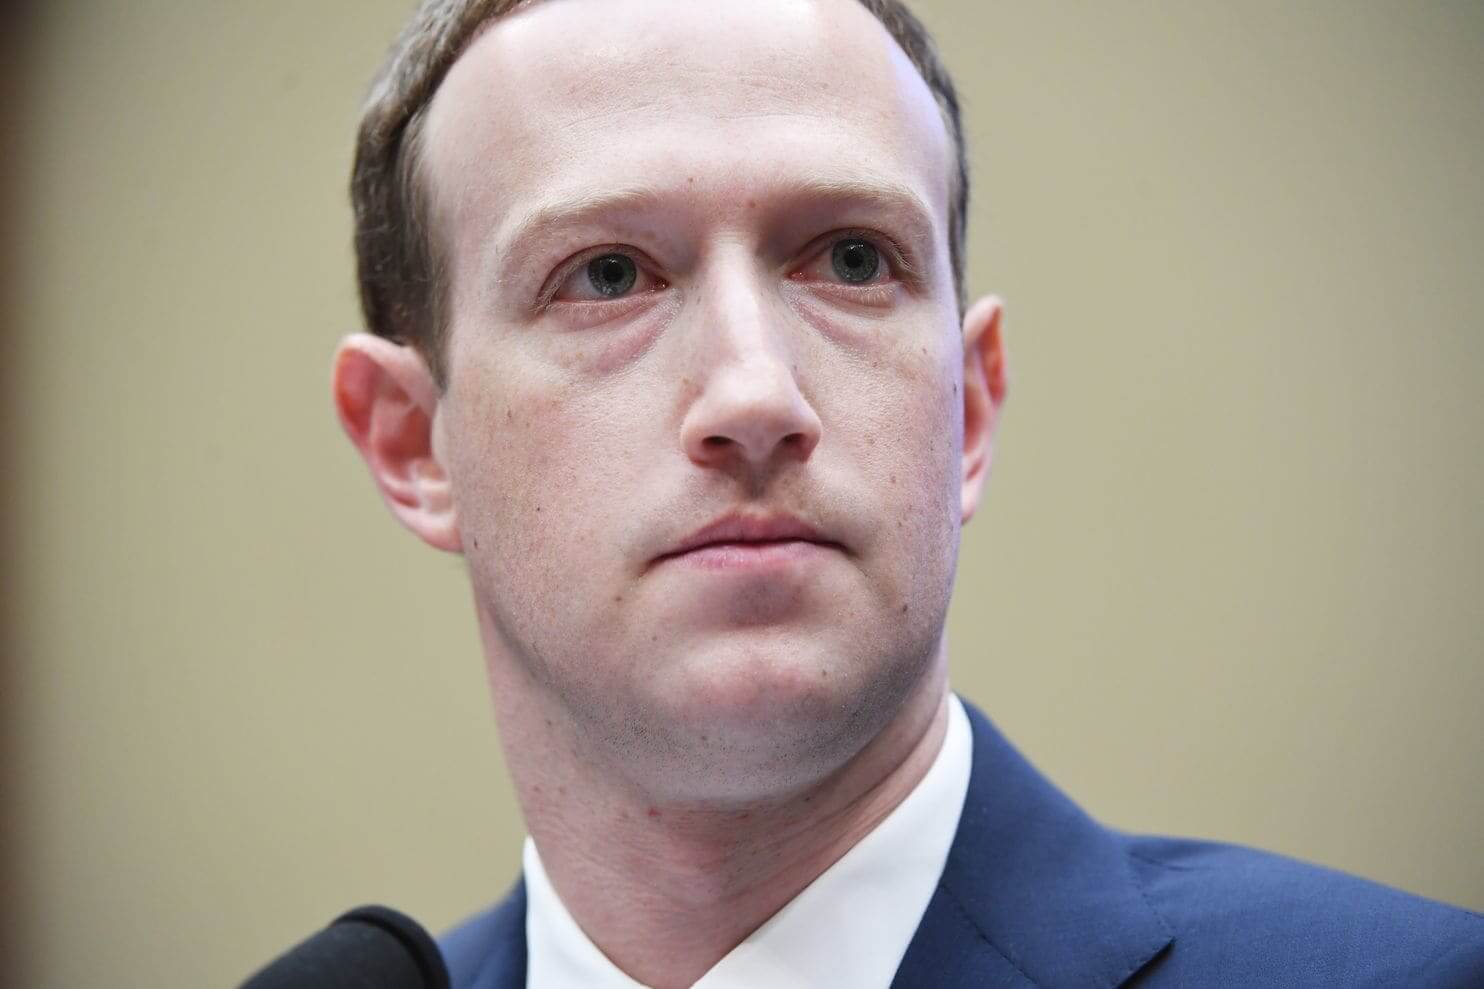 CEO Mark Zuckerberg in Limbo and Could Be Held In Contempt